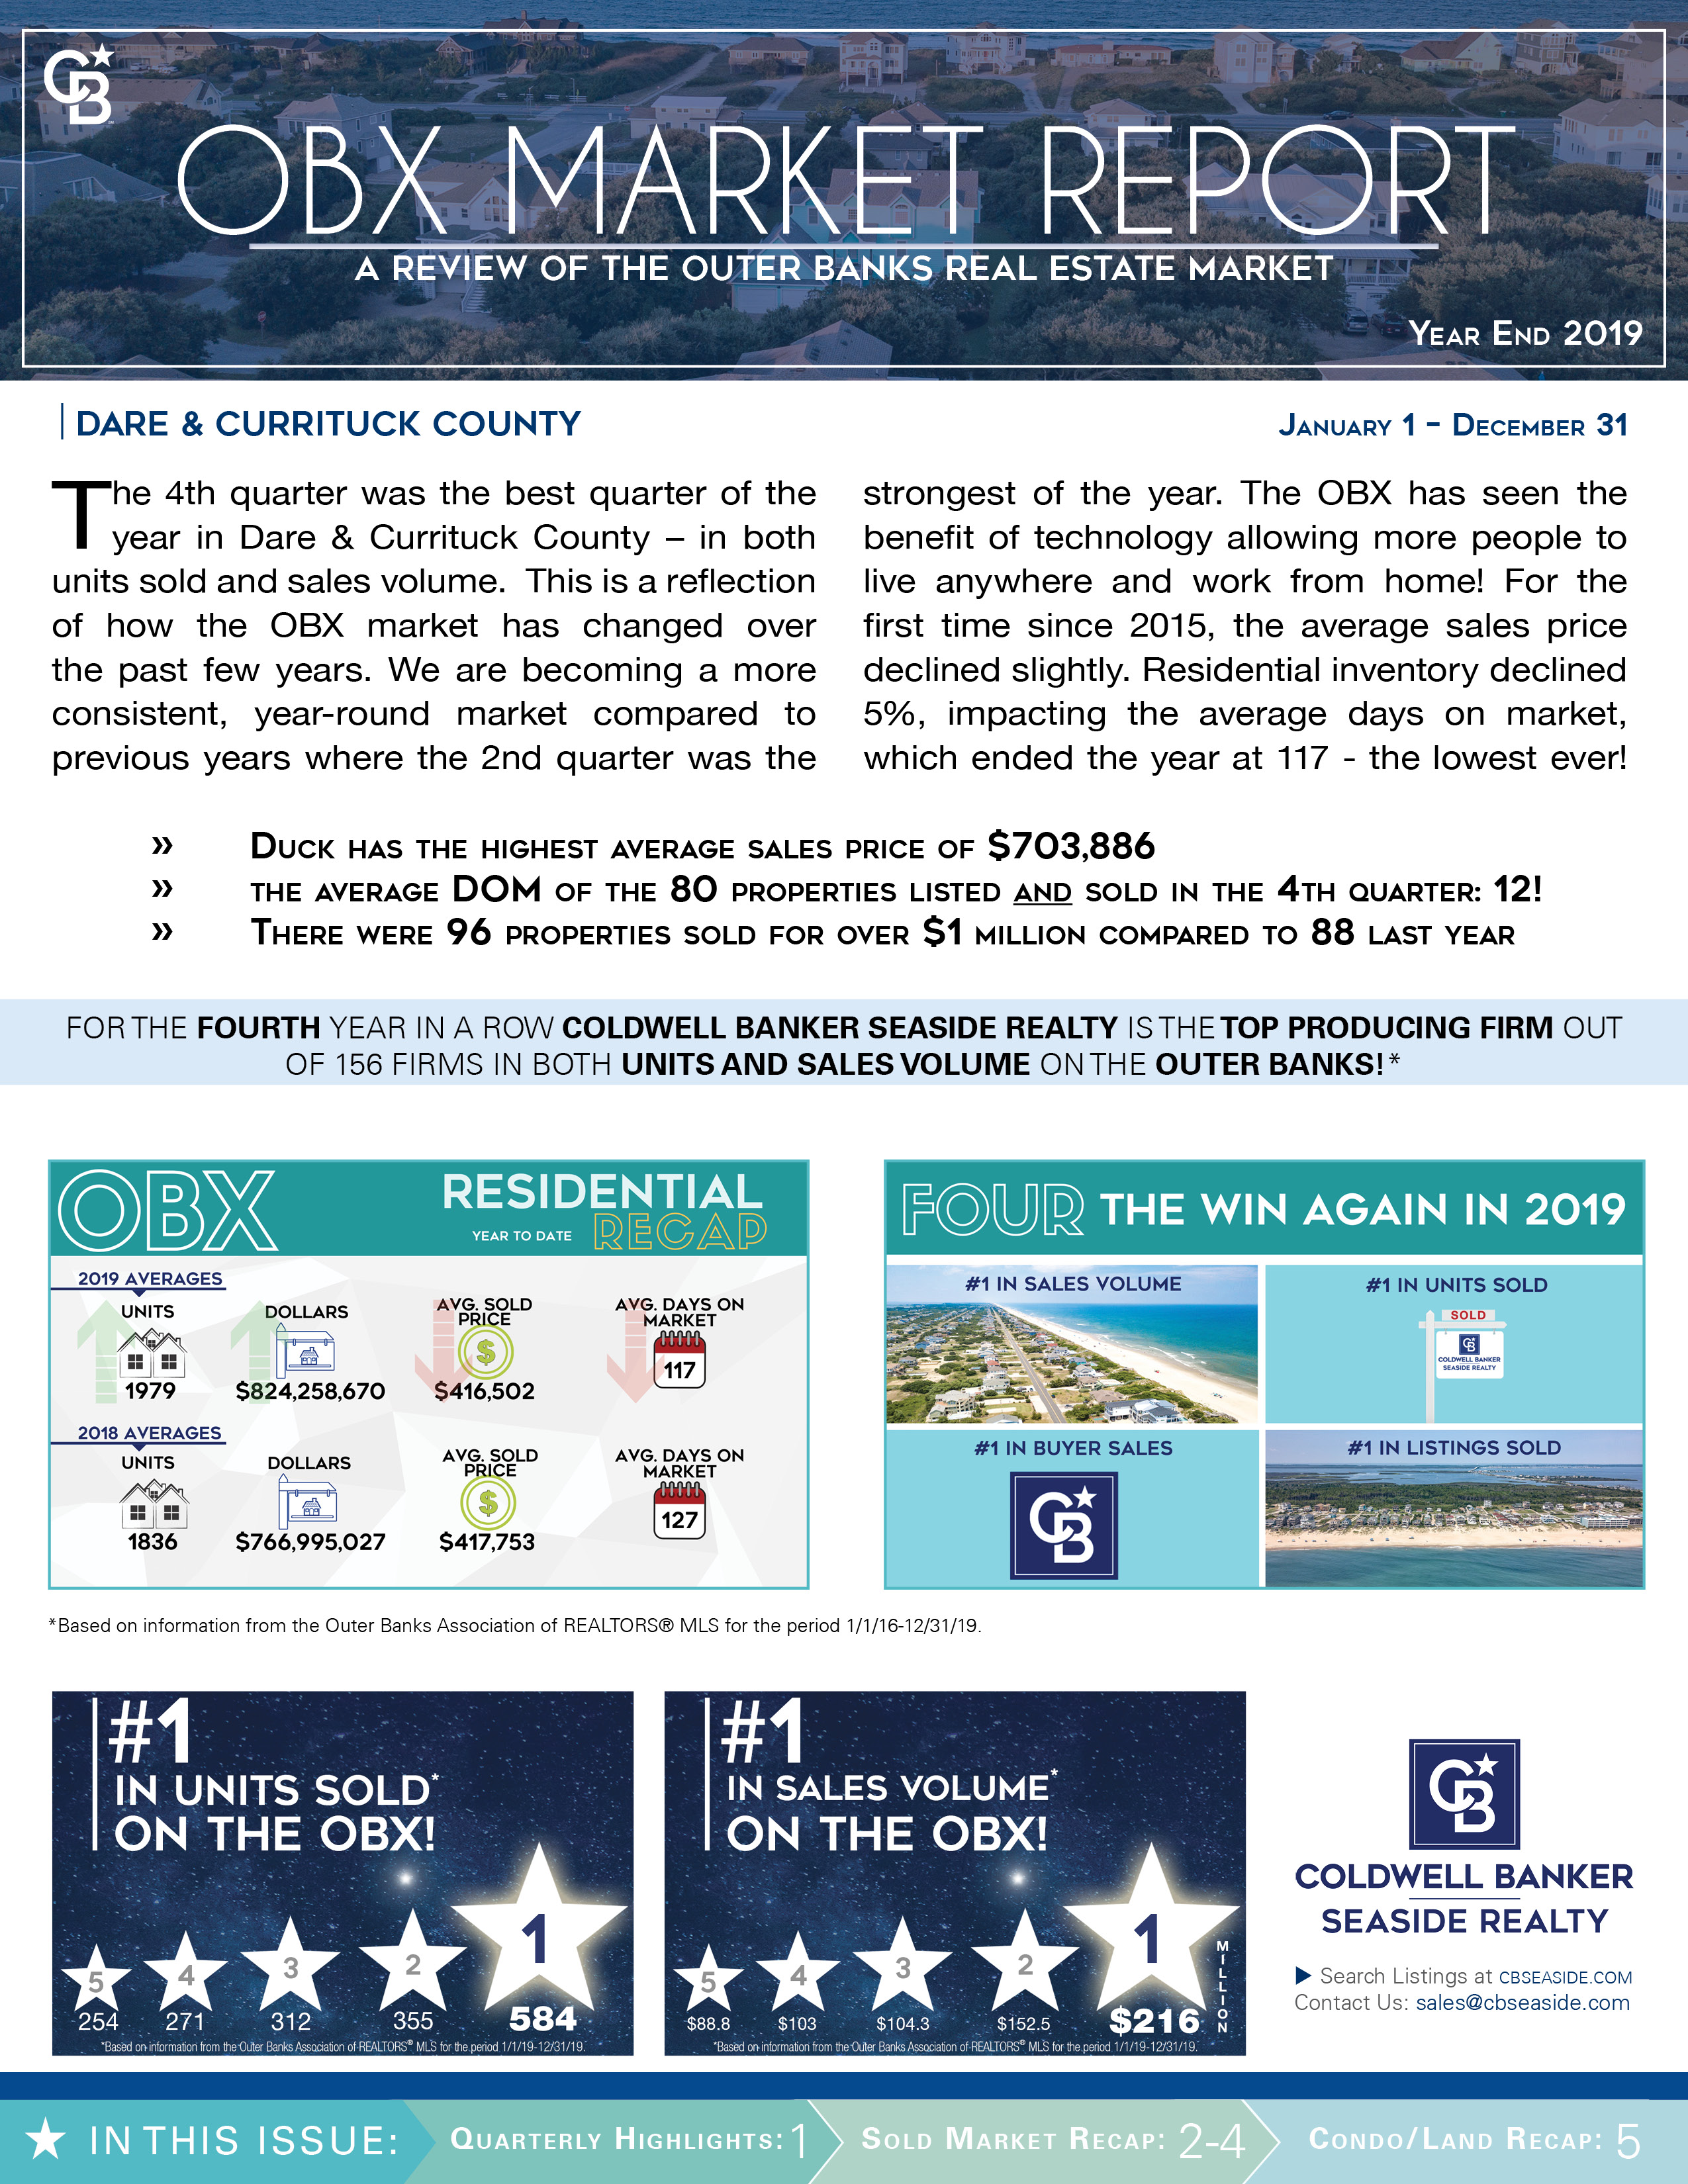 First page of Coldwell Banker Seaside Realty's 2019 Year End OBX Market Report recapping all residential properties sold in Dare and Currituck County.